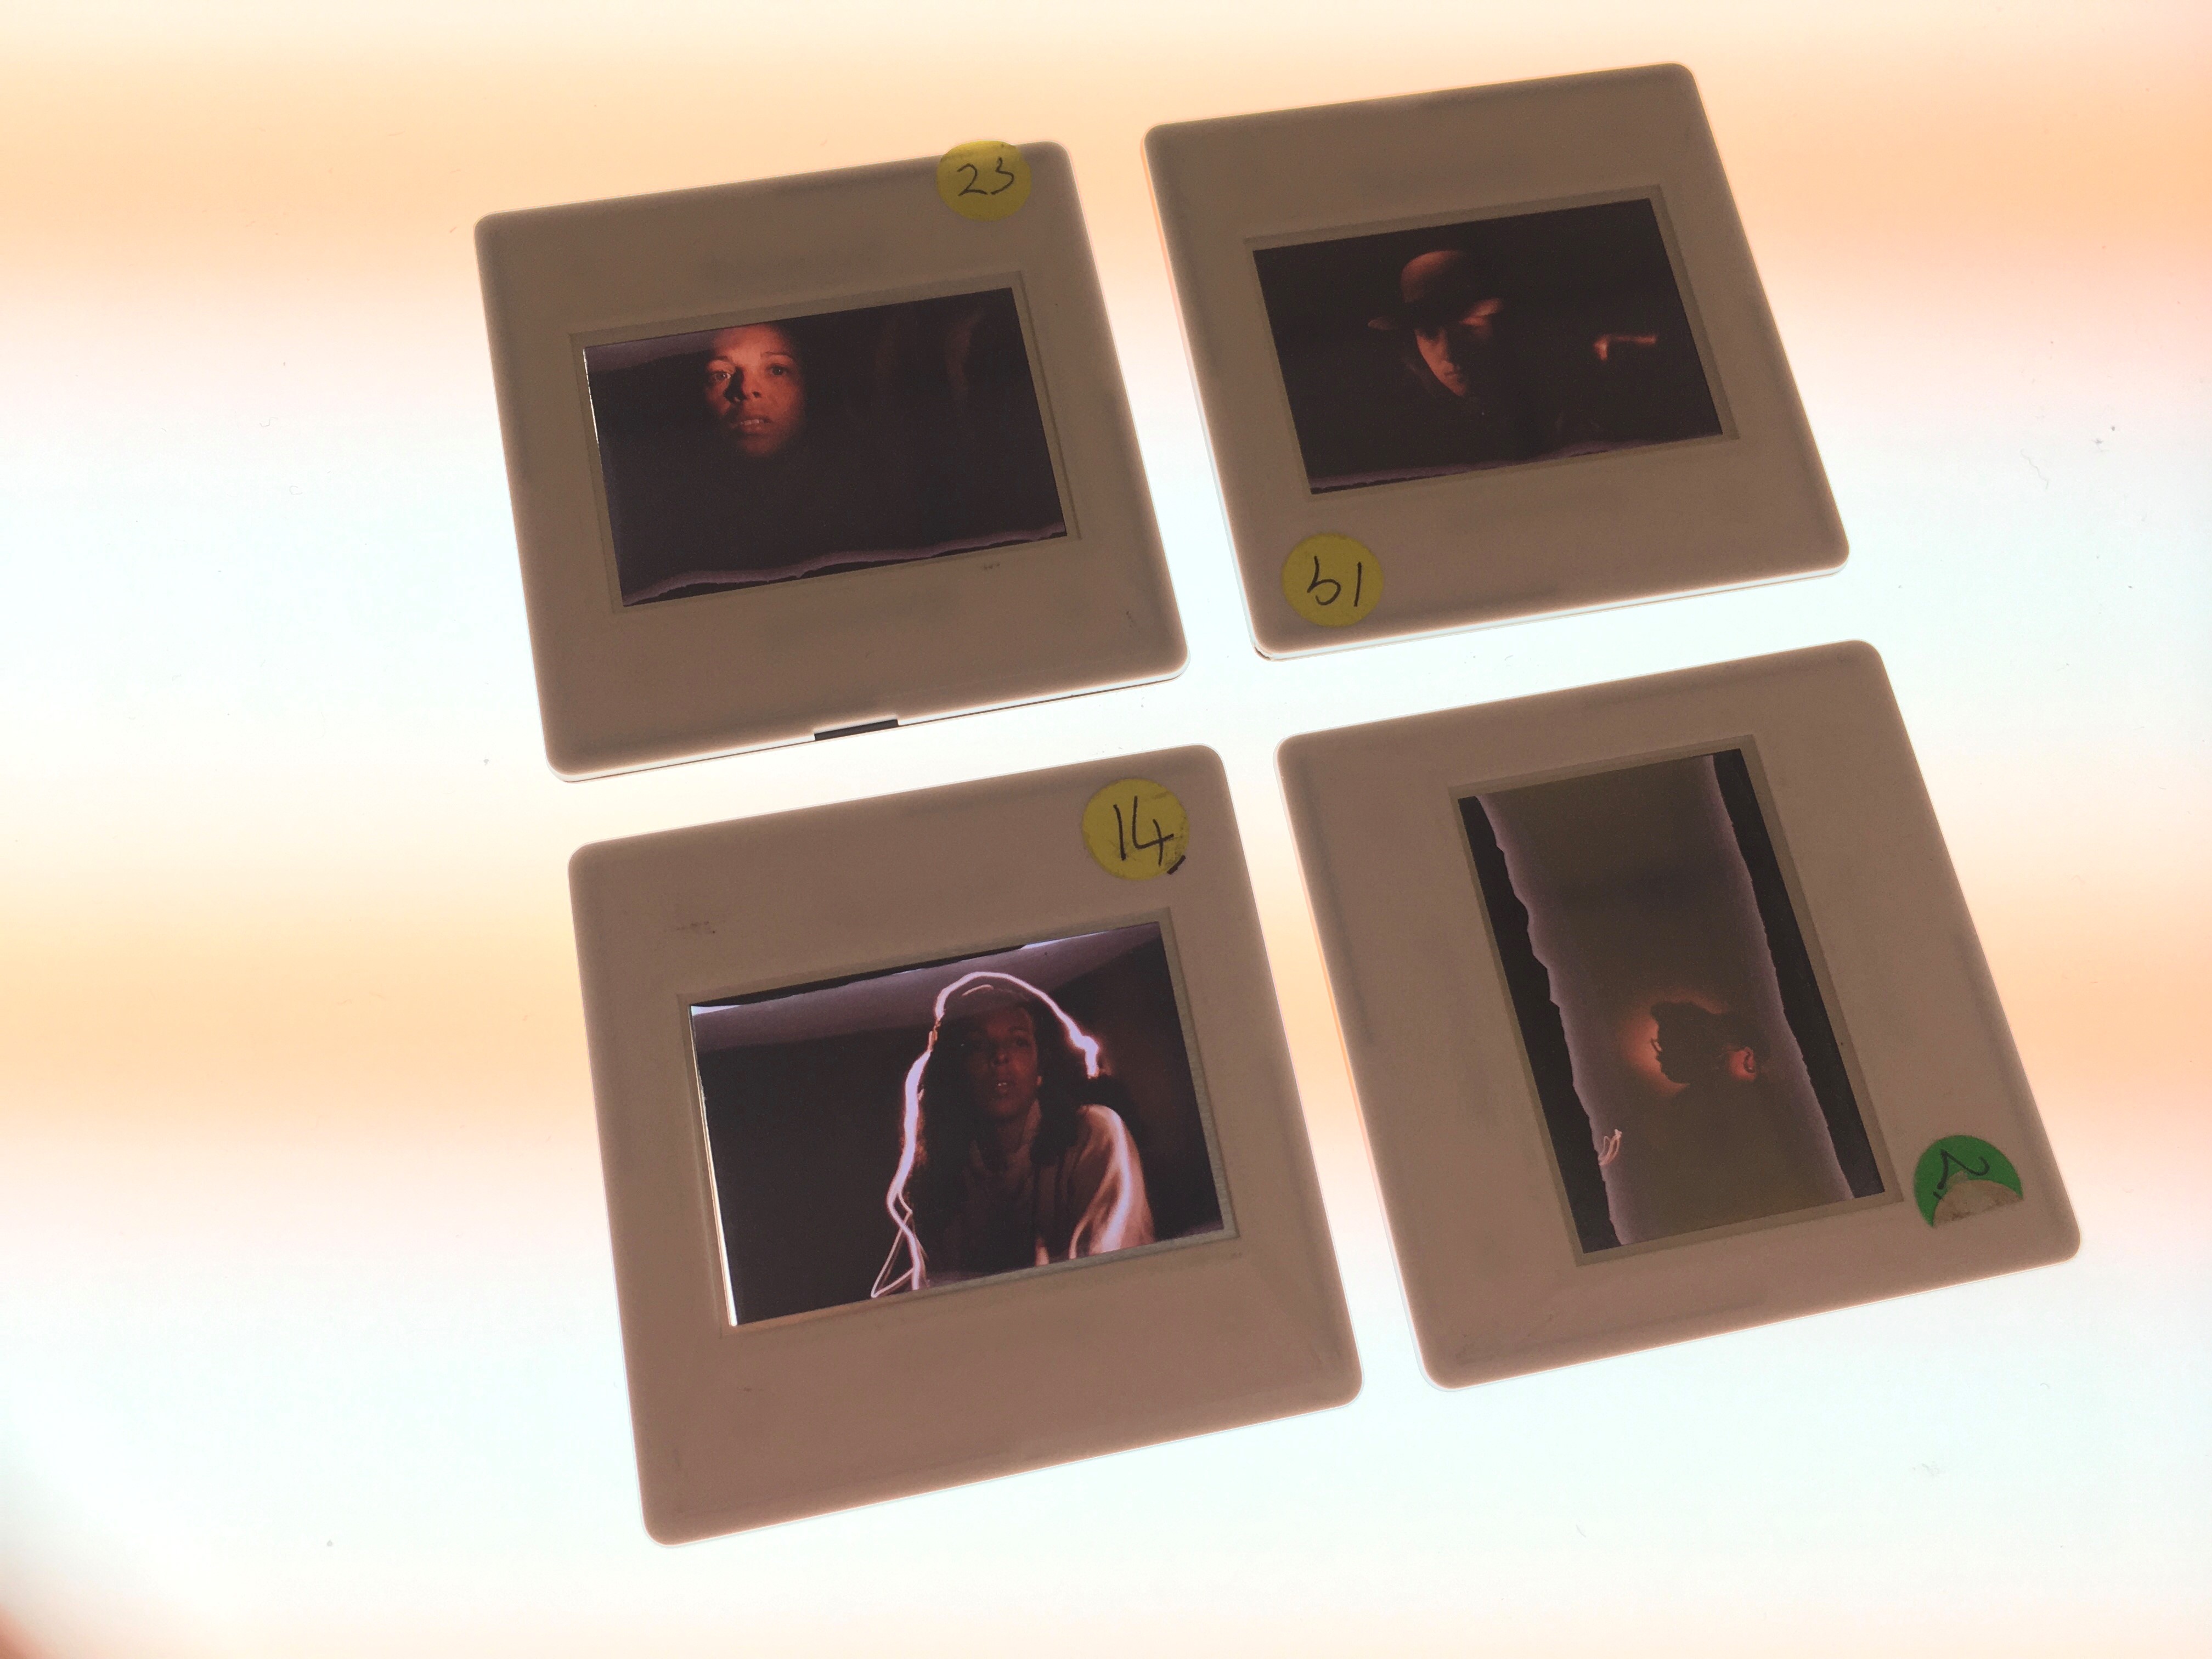 Colour image of 4 slides lit from the back, resting on a light box. 35mm colour transparencies mounted in standard white plastic slide mounts, labelled on the corners with round yellow stickers with numbers on them. The images appear to show portraits of women of colour